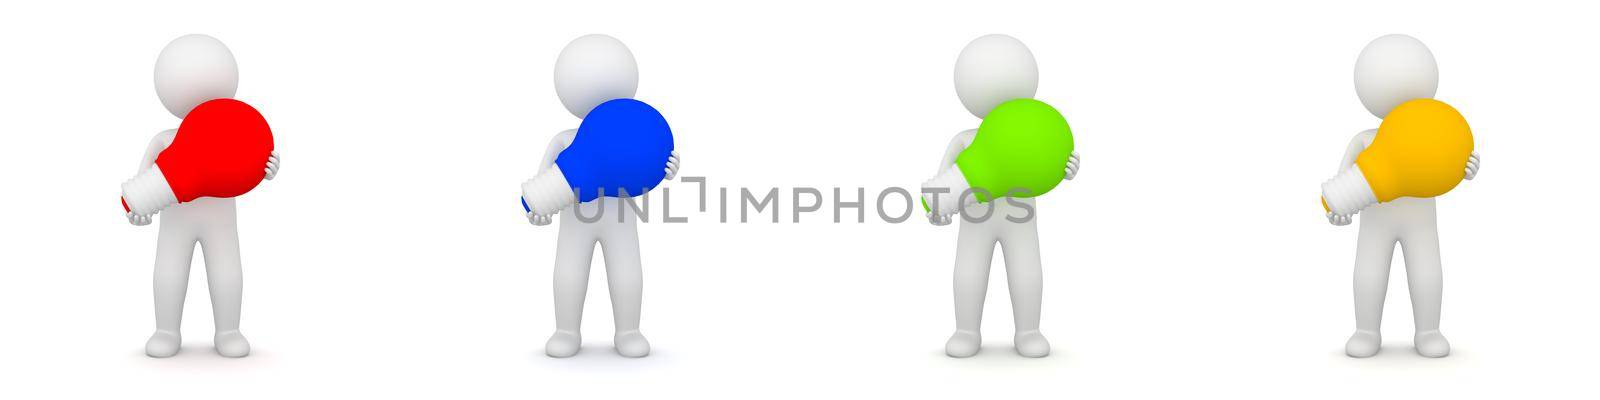 3D Rendering of a man holding a red incandescent light bulb on white background